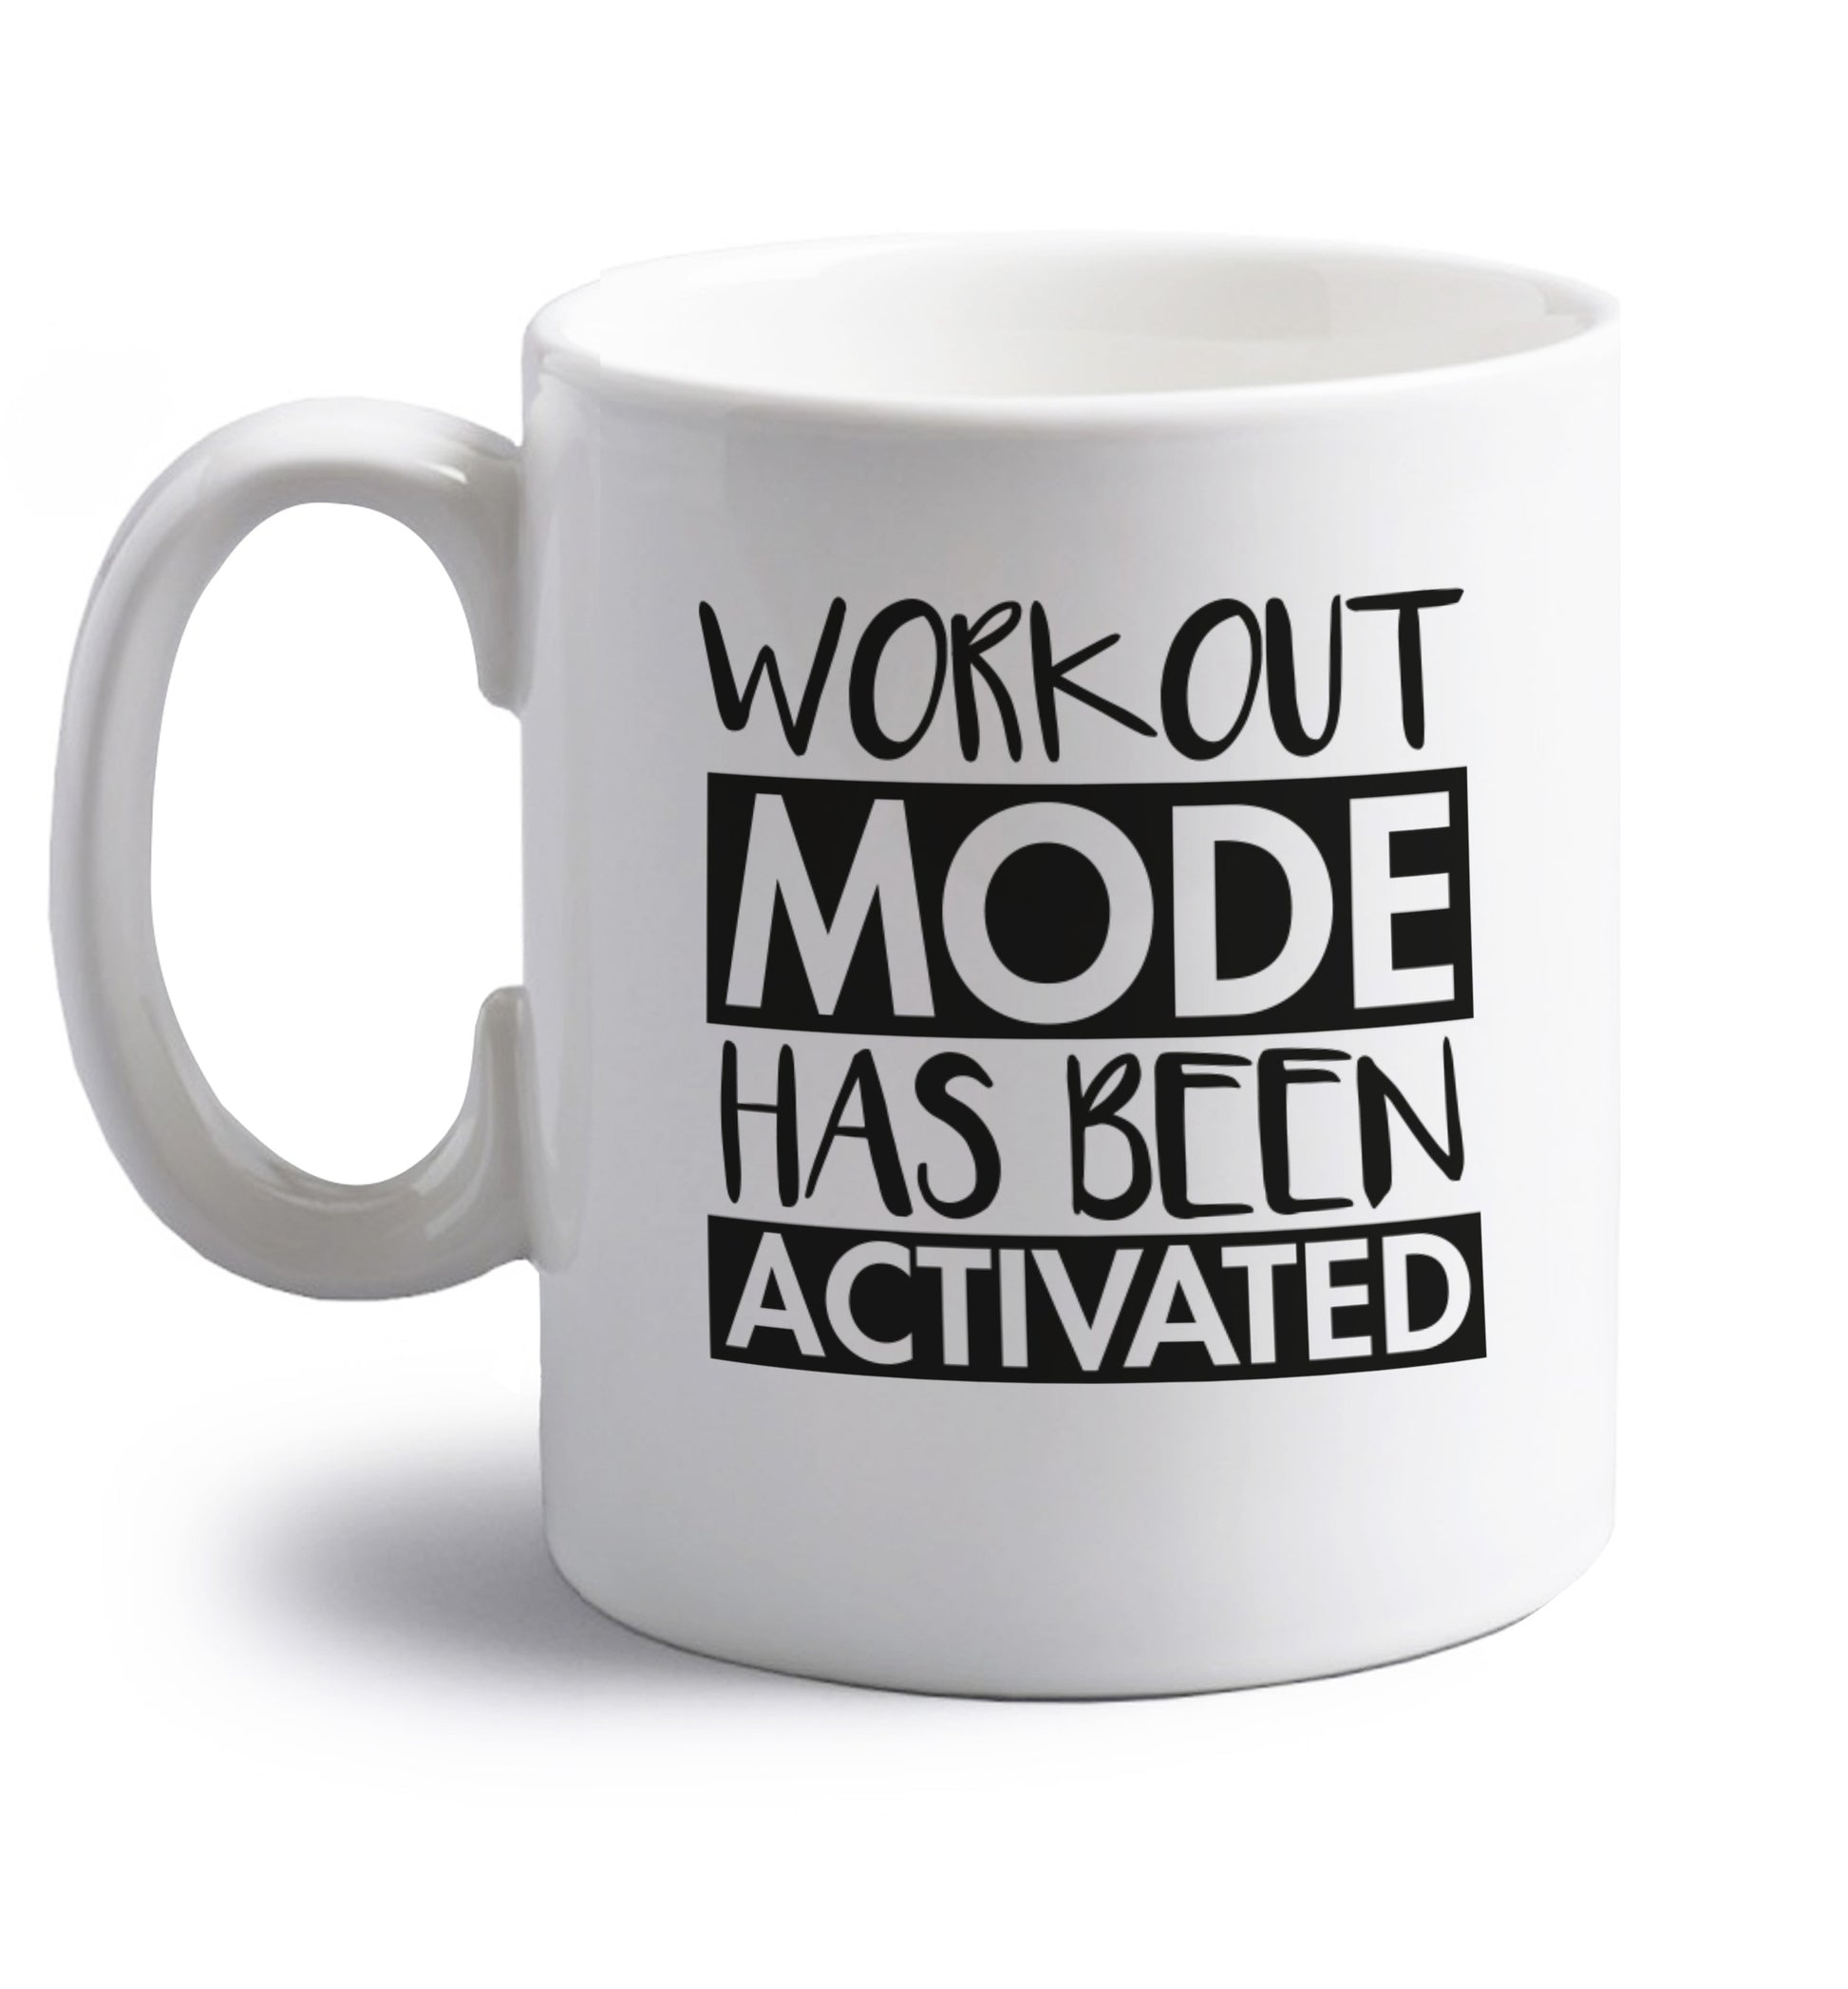 Workout mode has been activated right handed white ceramic mug 